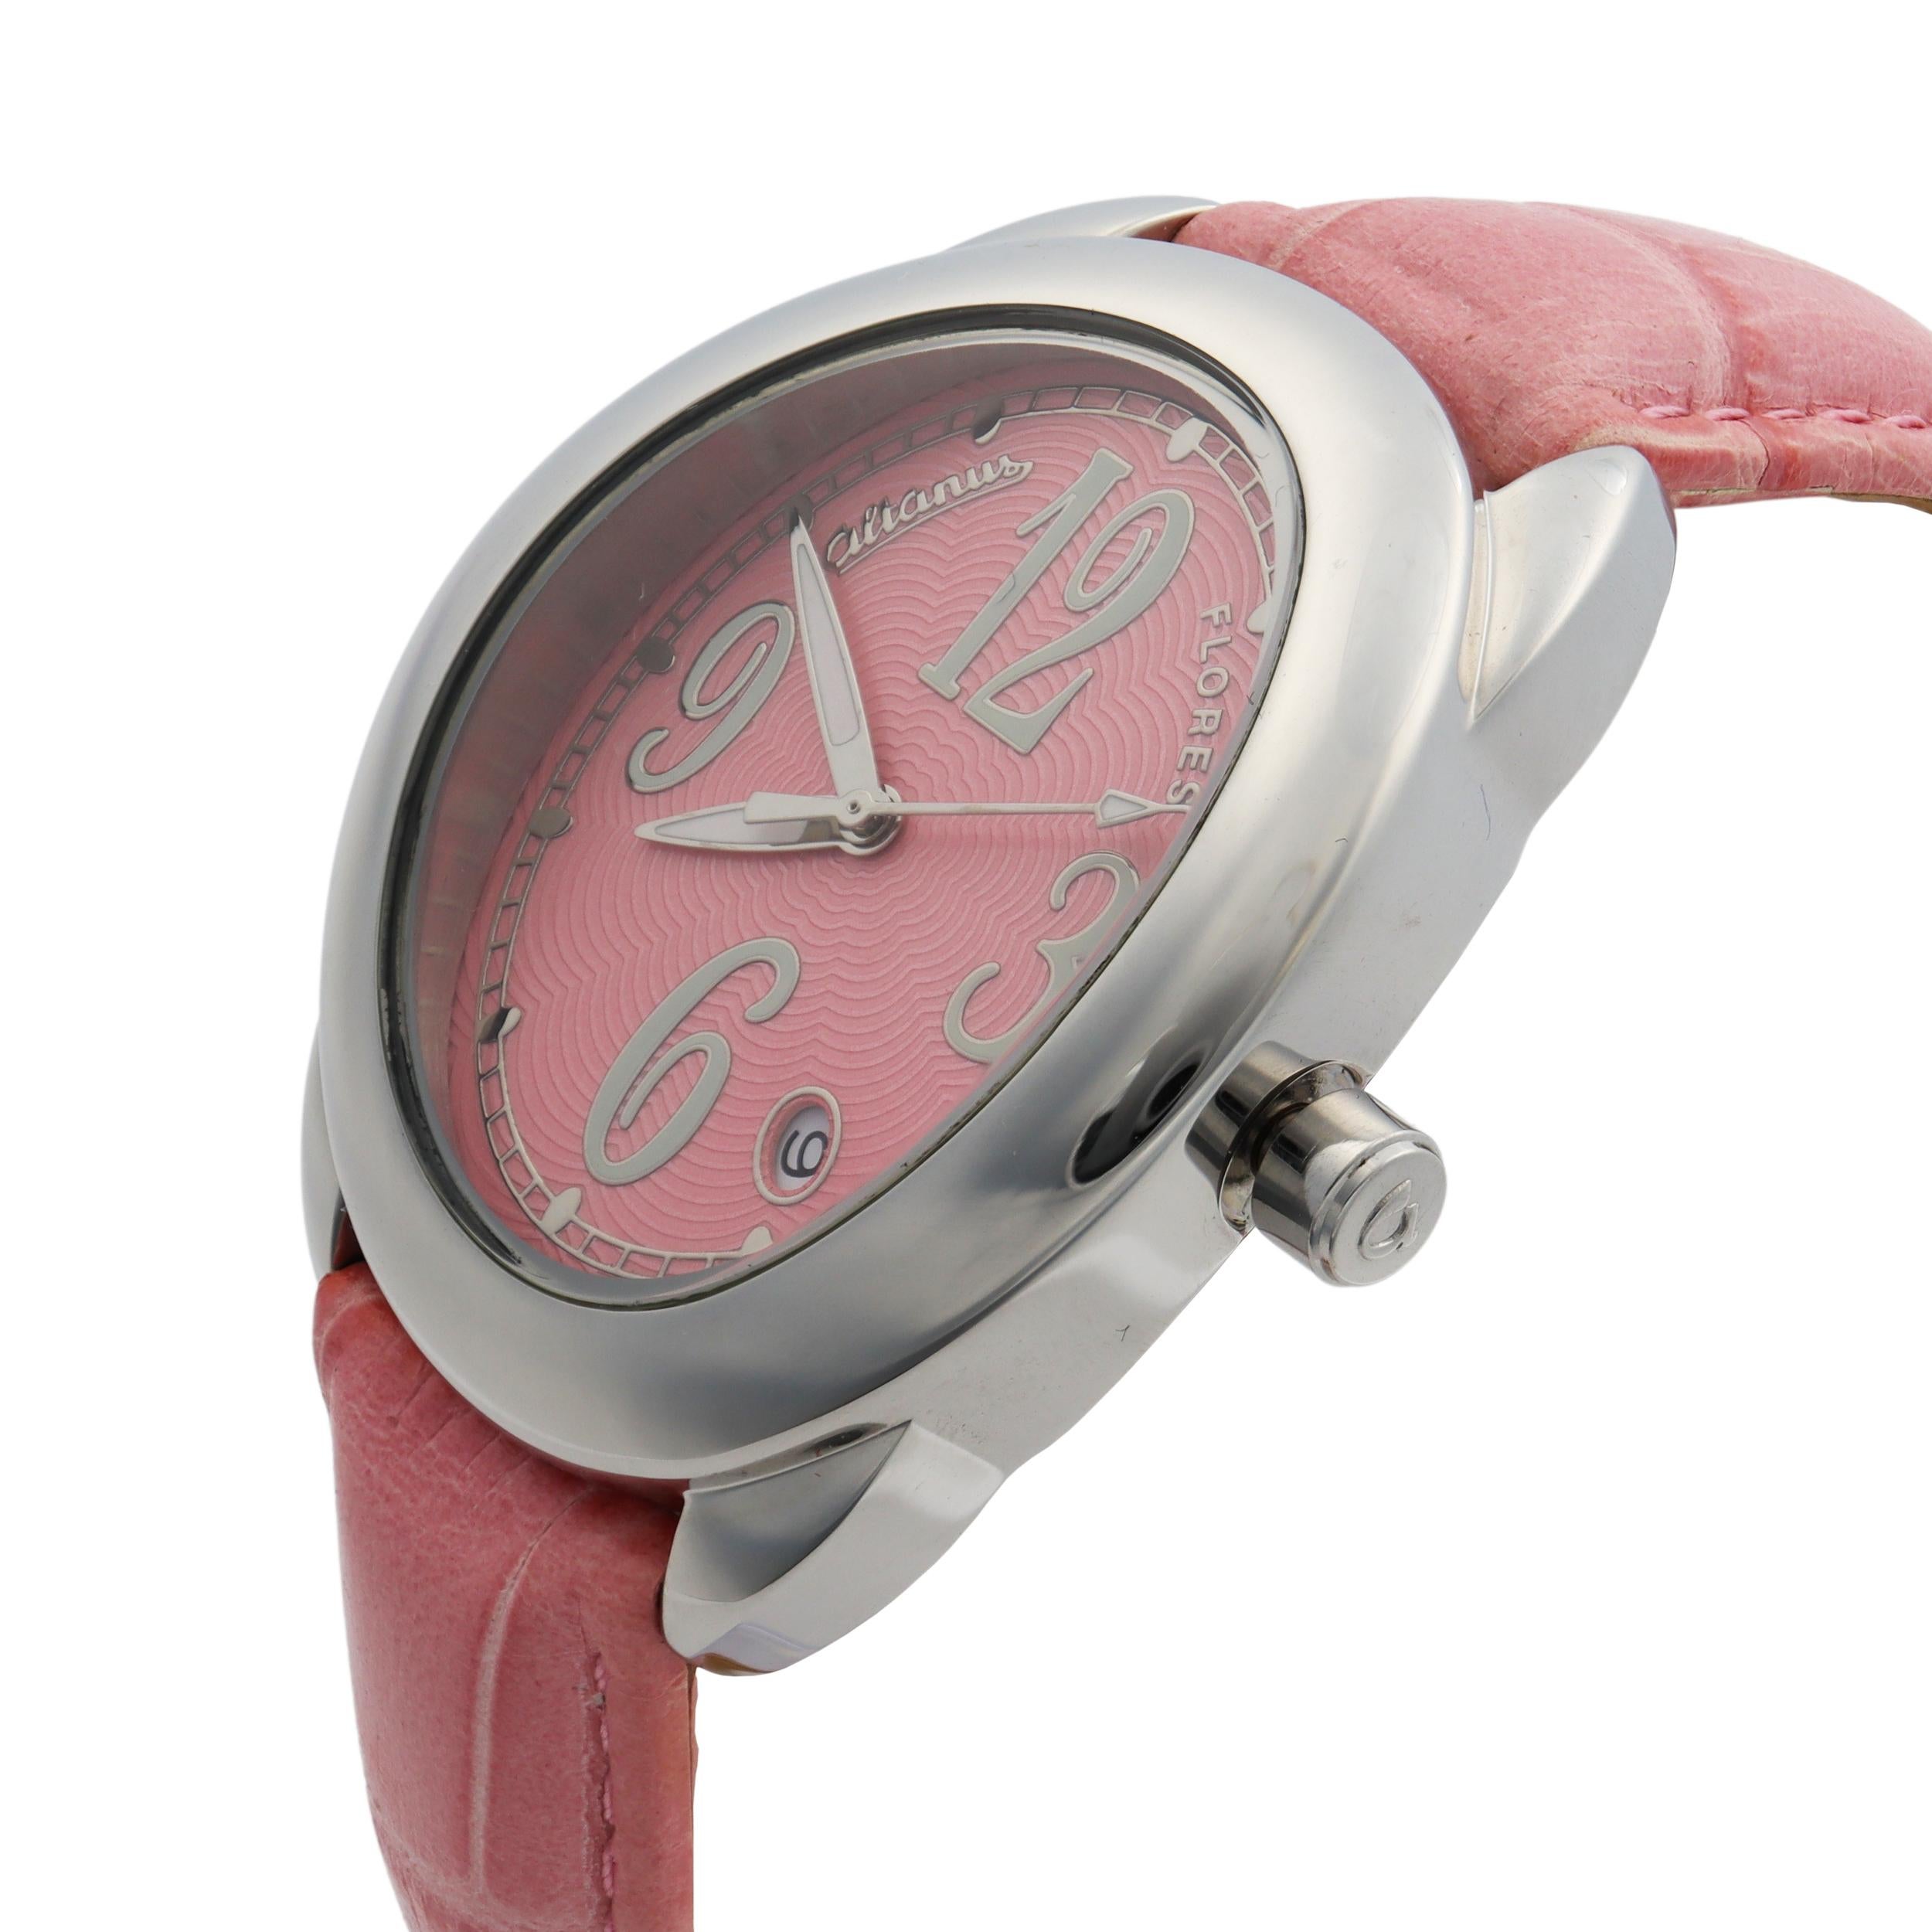 Unworn Altanus Flores Steel Pink Dial and Strap Quartz Ladies Watch. No Original Box and Papers are Included. Chronostore Presentation Box and Authenticity Card are included. Covered by 1-year Chronostore Warranty.
Details:
Brand Altanus
Department